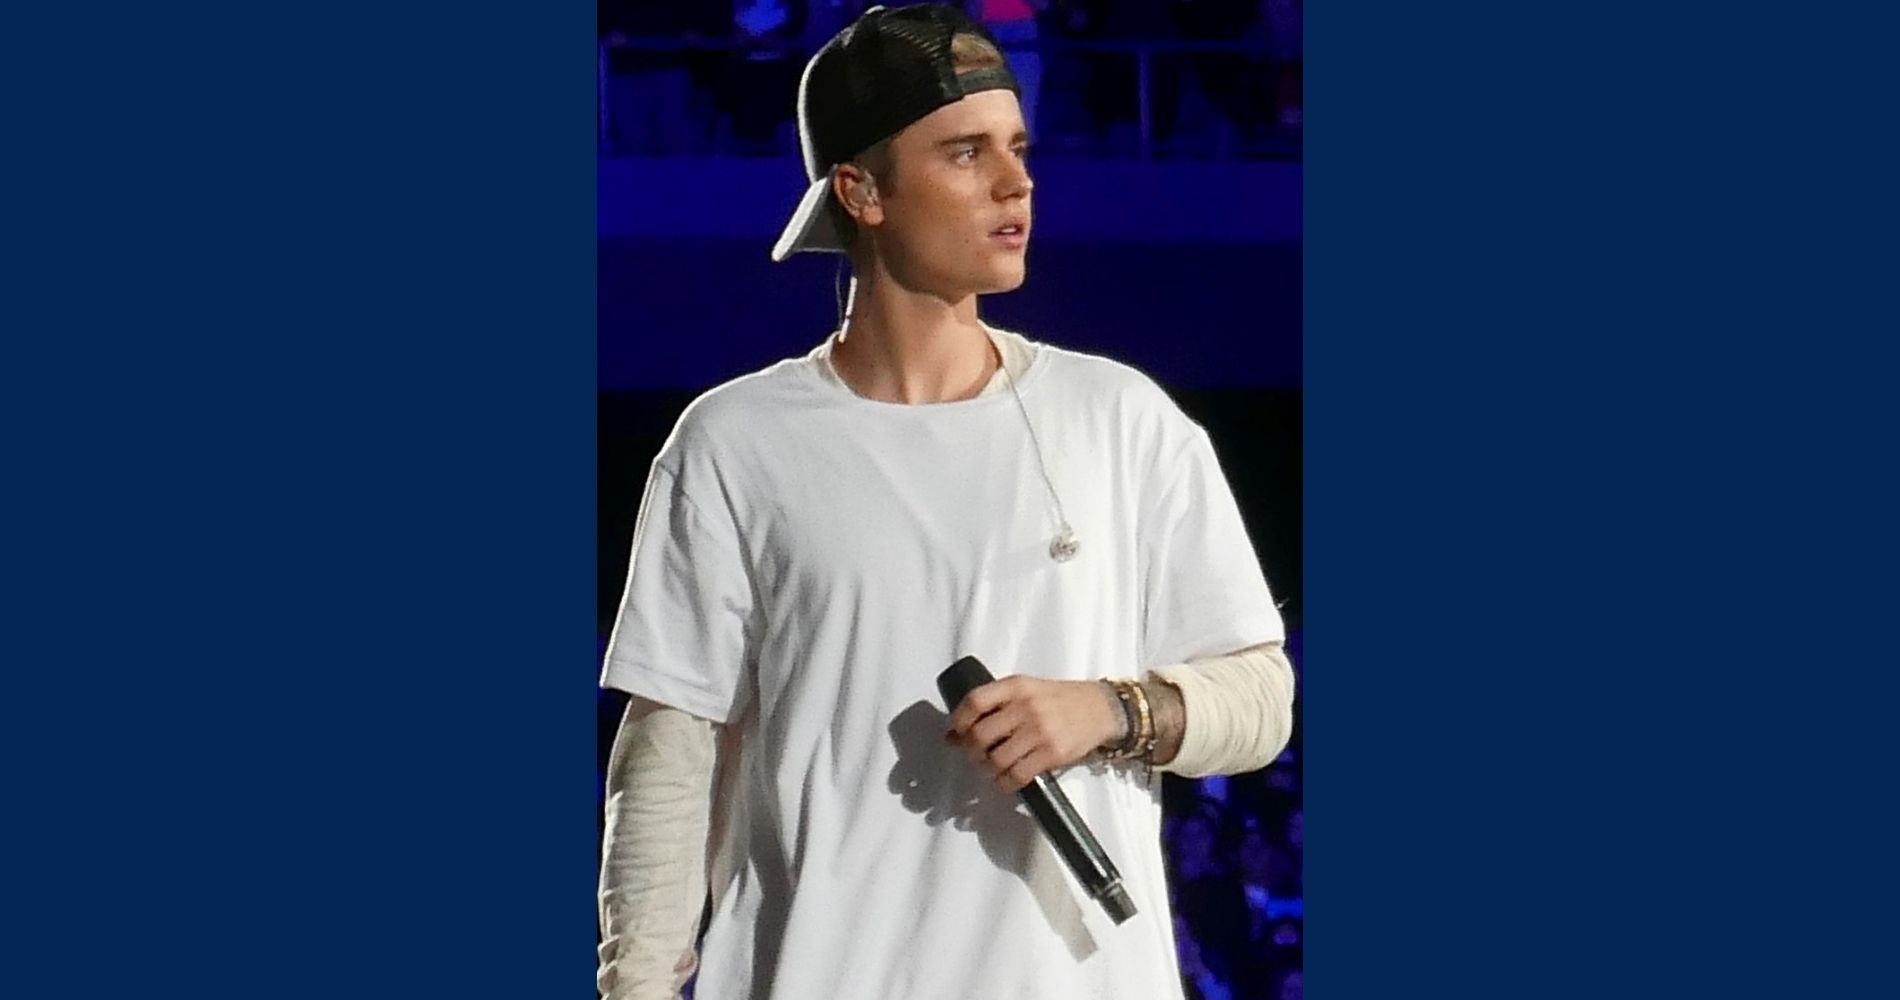 Justin Bieber is all set for his world tour in